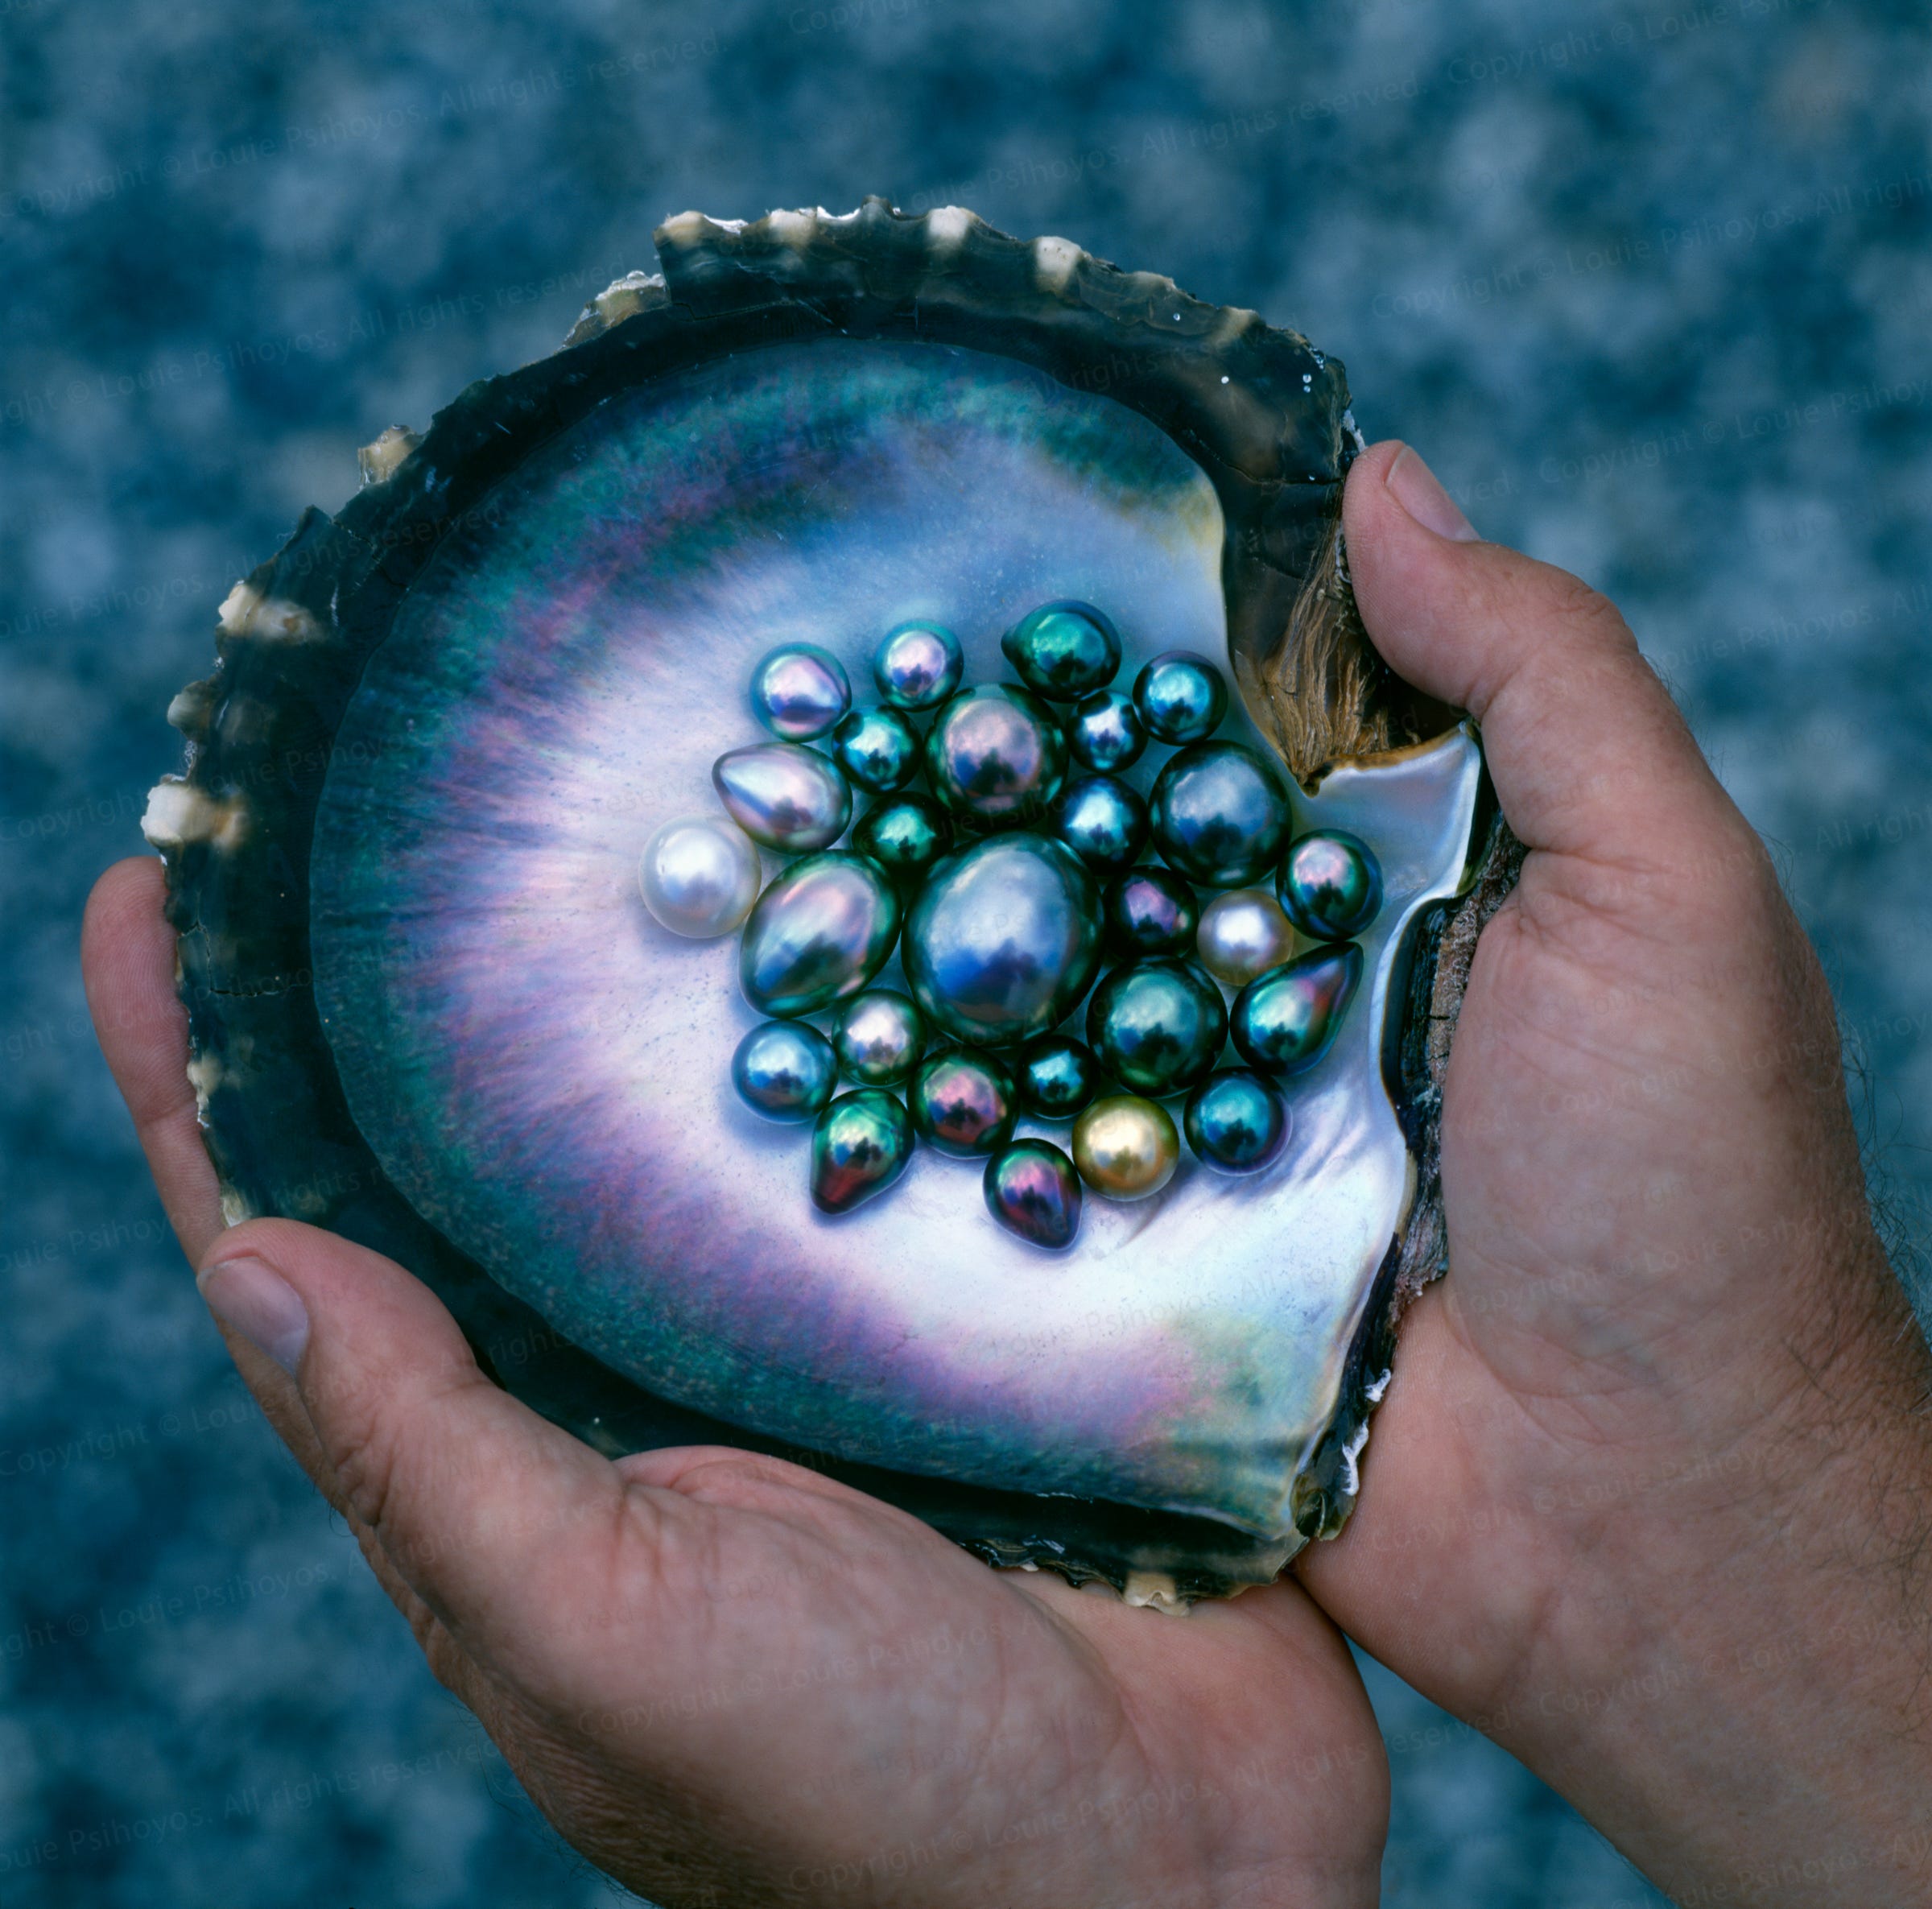 How an oyster builds a perfectly round pearl